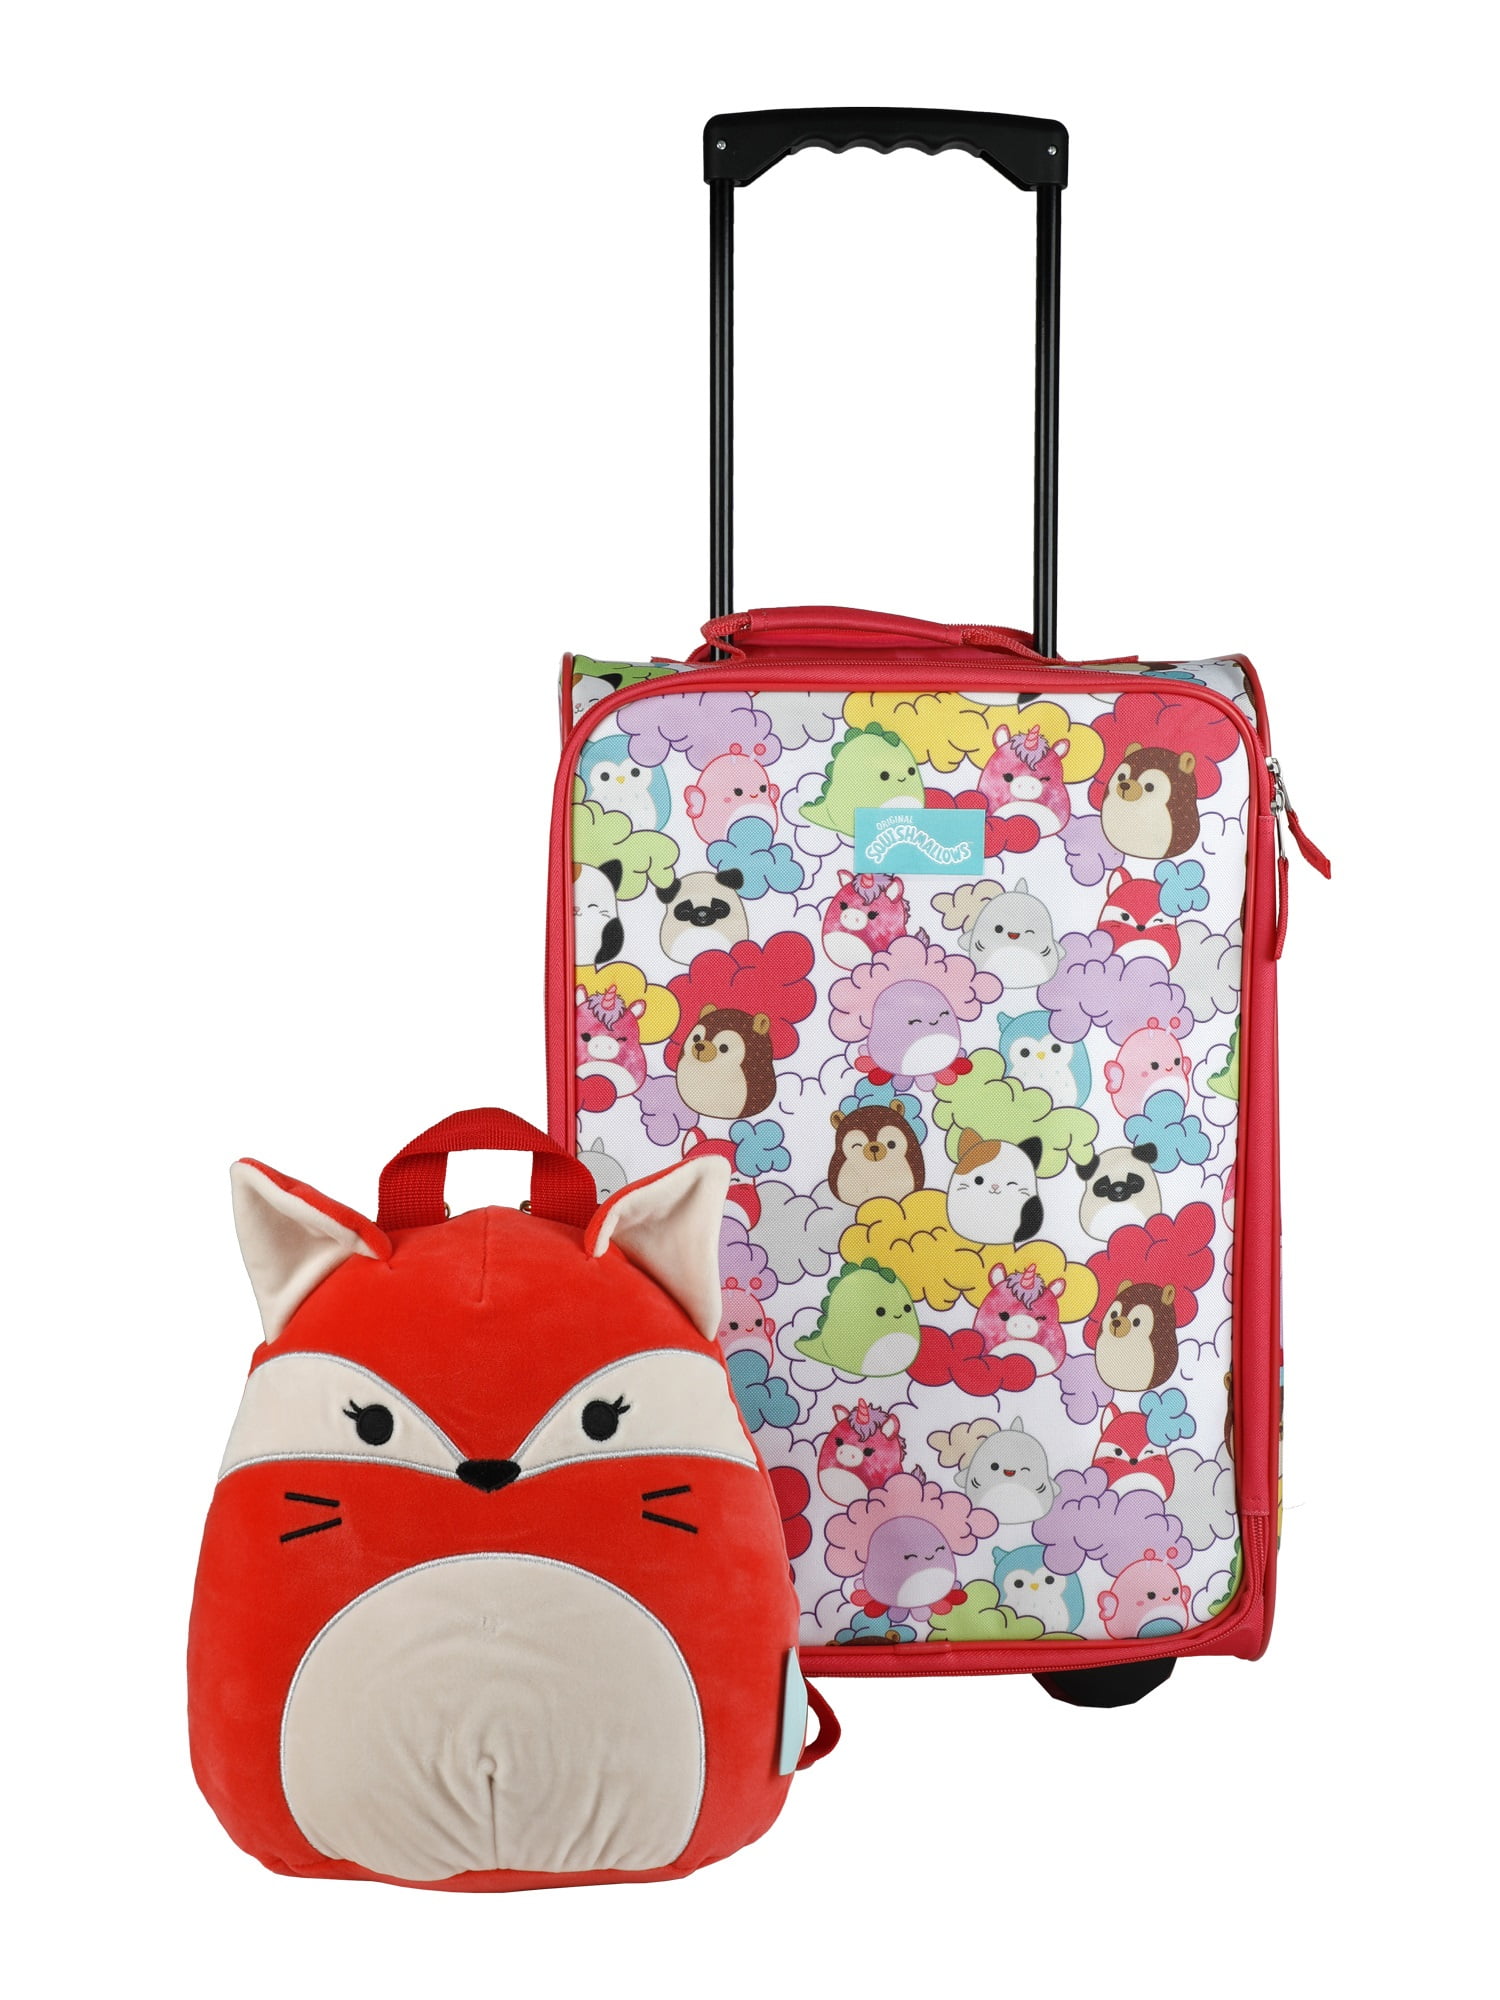 Squishmallows Fifi Fox 2pc  Travel Set with 18" Luggage and 10" Plush Backpack